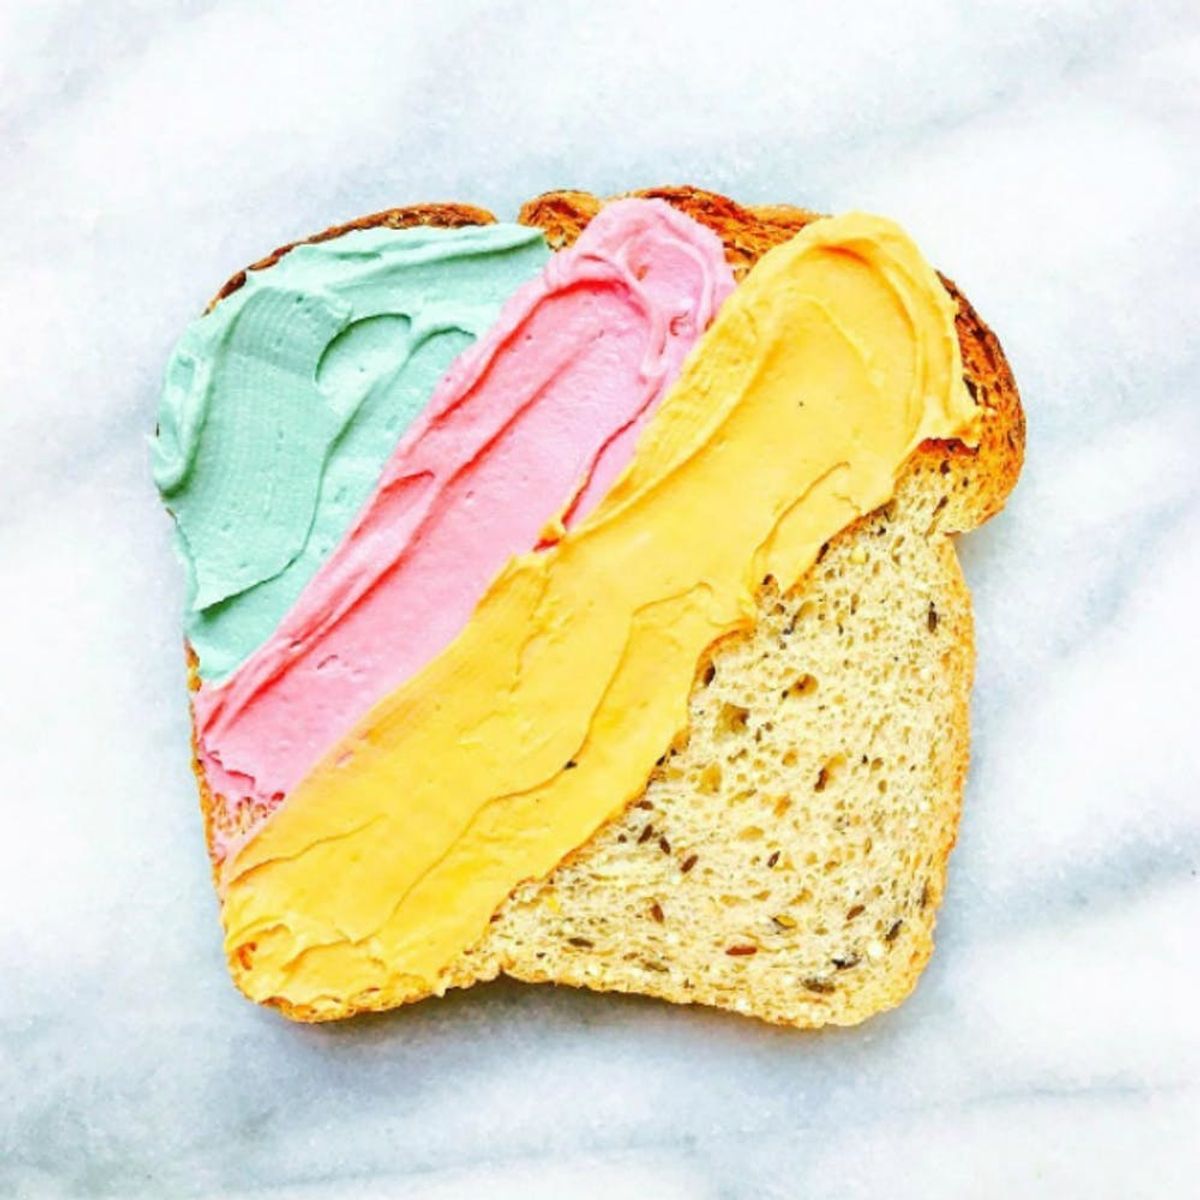 Unicorn Toast Is the New Food Trend Set to Blow Up Your Instagram Feed